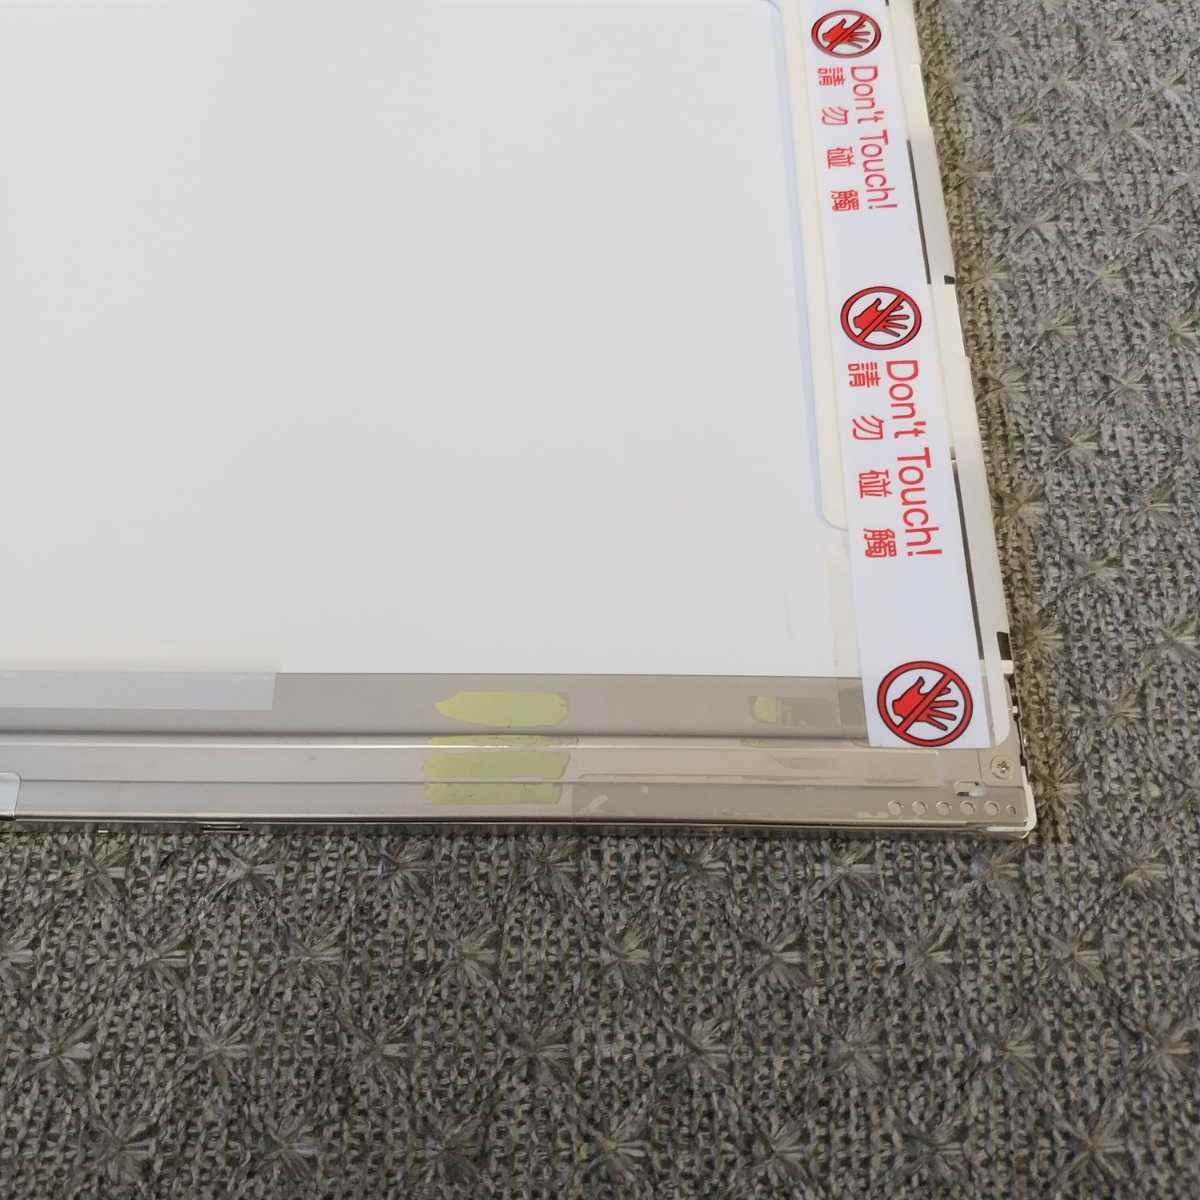  Gifu the same day departure special delivery postage 185 jpy * 14.1 -inch lustre liquid crystal panel Quanta QD14TL02 1280X800* SONY VAIO VGN-FJ11B/W etc. for * operation verification settled E264